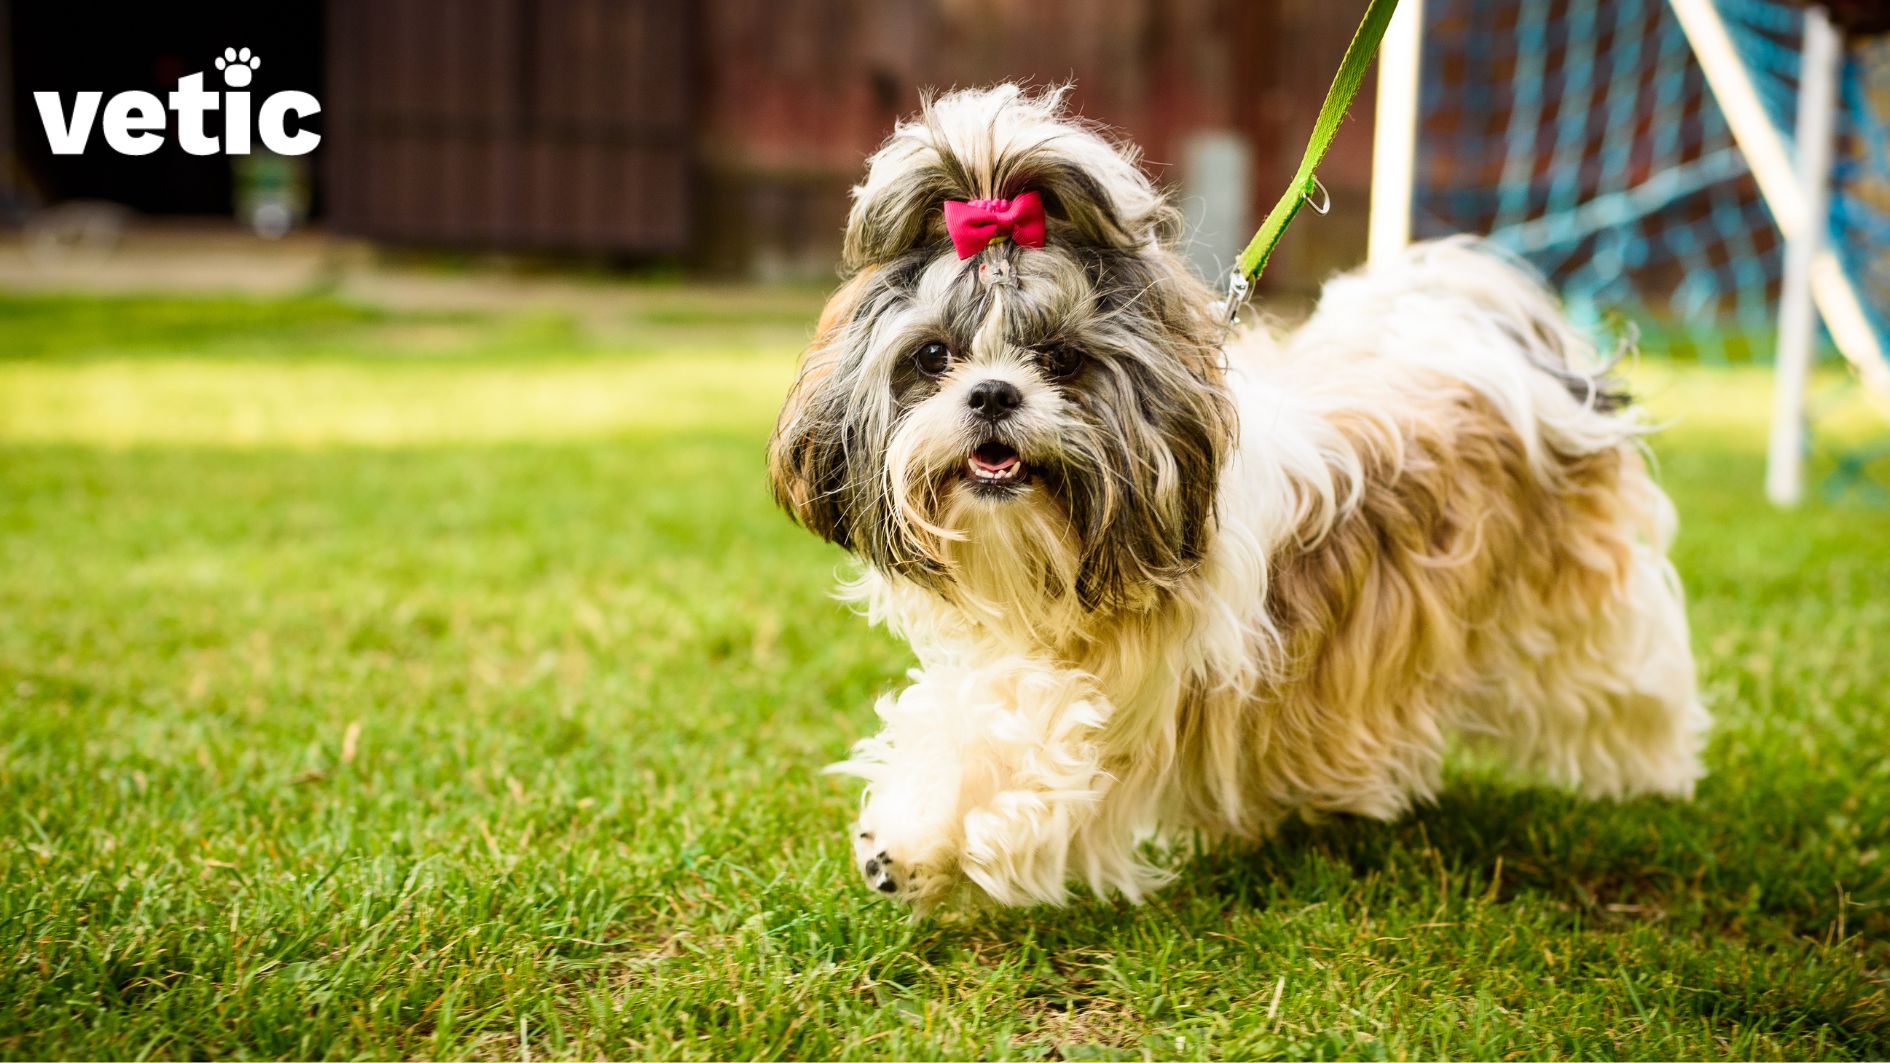 Shih Tzu with flowing long fur on the grass. She has a cute pink bow and a classic Shih Tzu pony. She is on a green leash.